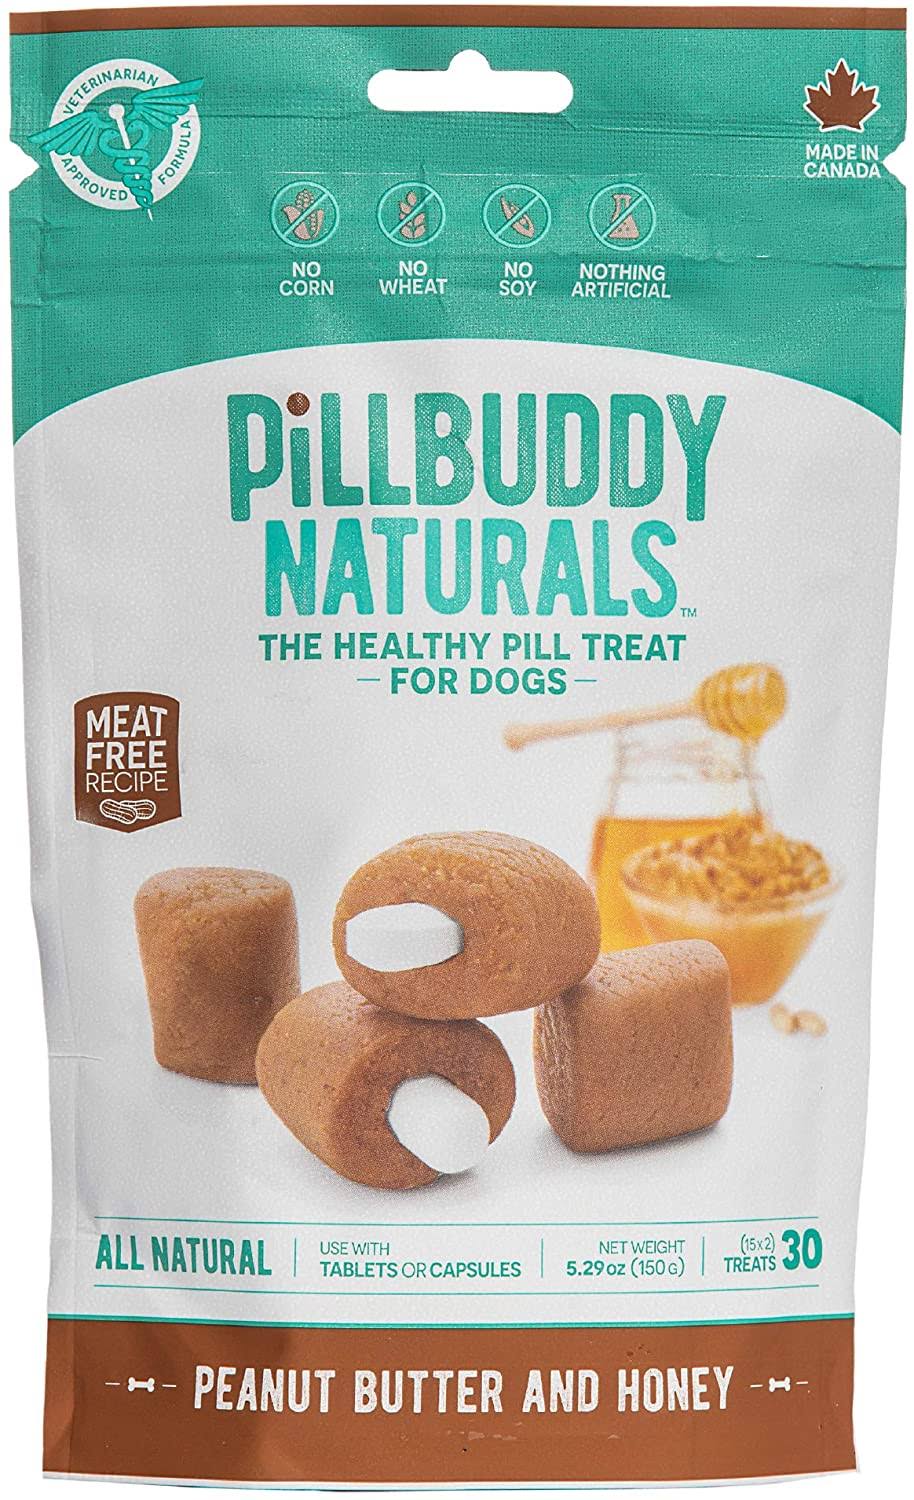 Pill Buddy Naturals, Peanut Butter & Honey Recipe For Dogs, 1 Pack, 30-Count